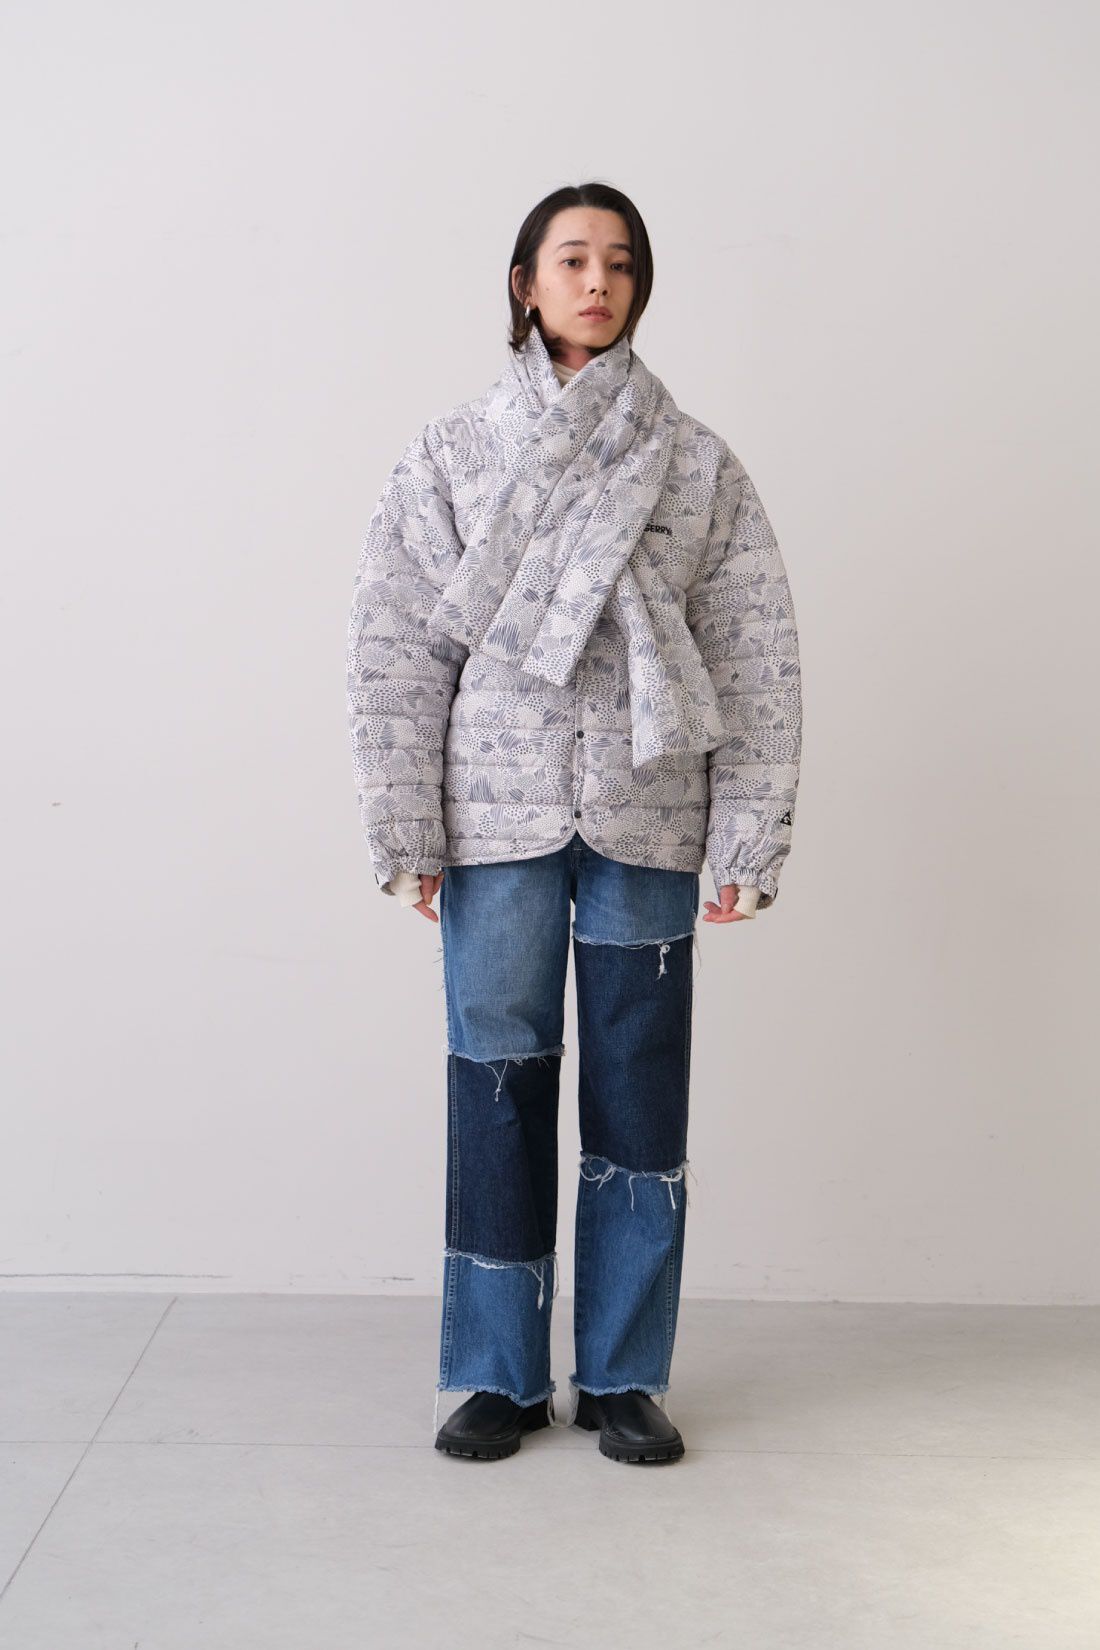 Real Stock|MEDE19F 〈SELECT〉　【GERRY】 QUILTING JACKET|4 geometric dot　モデル身長：168cm